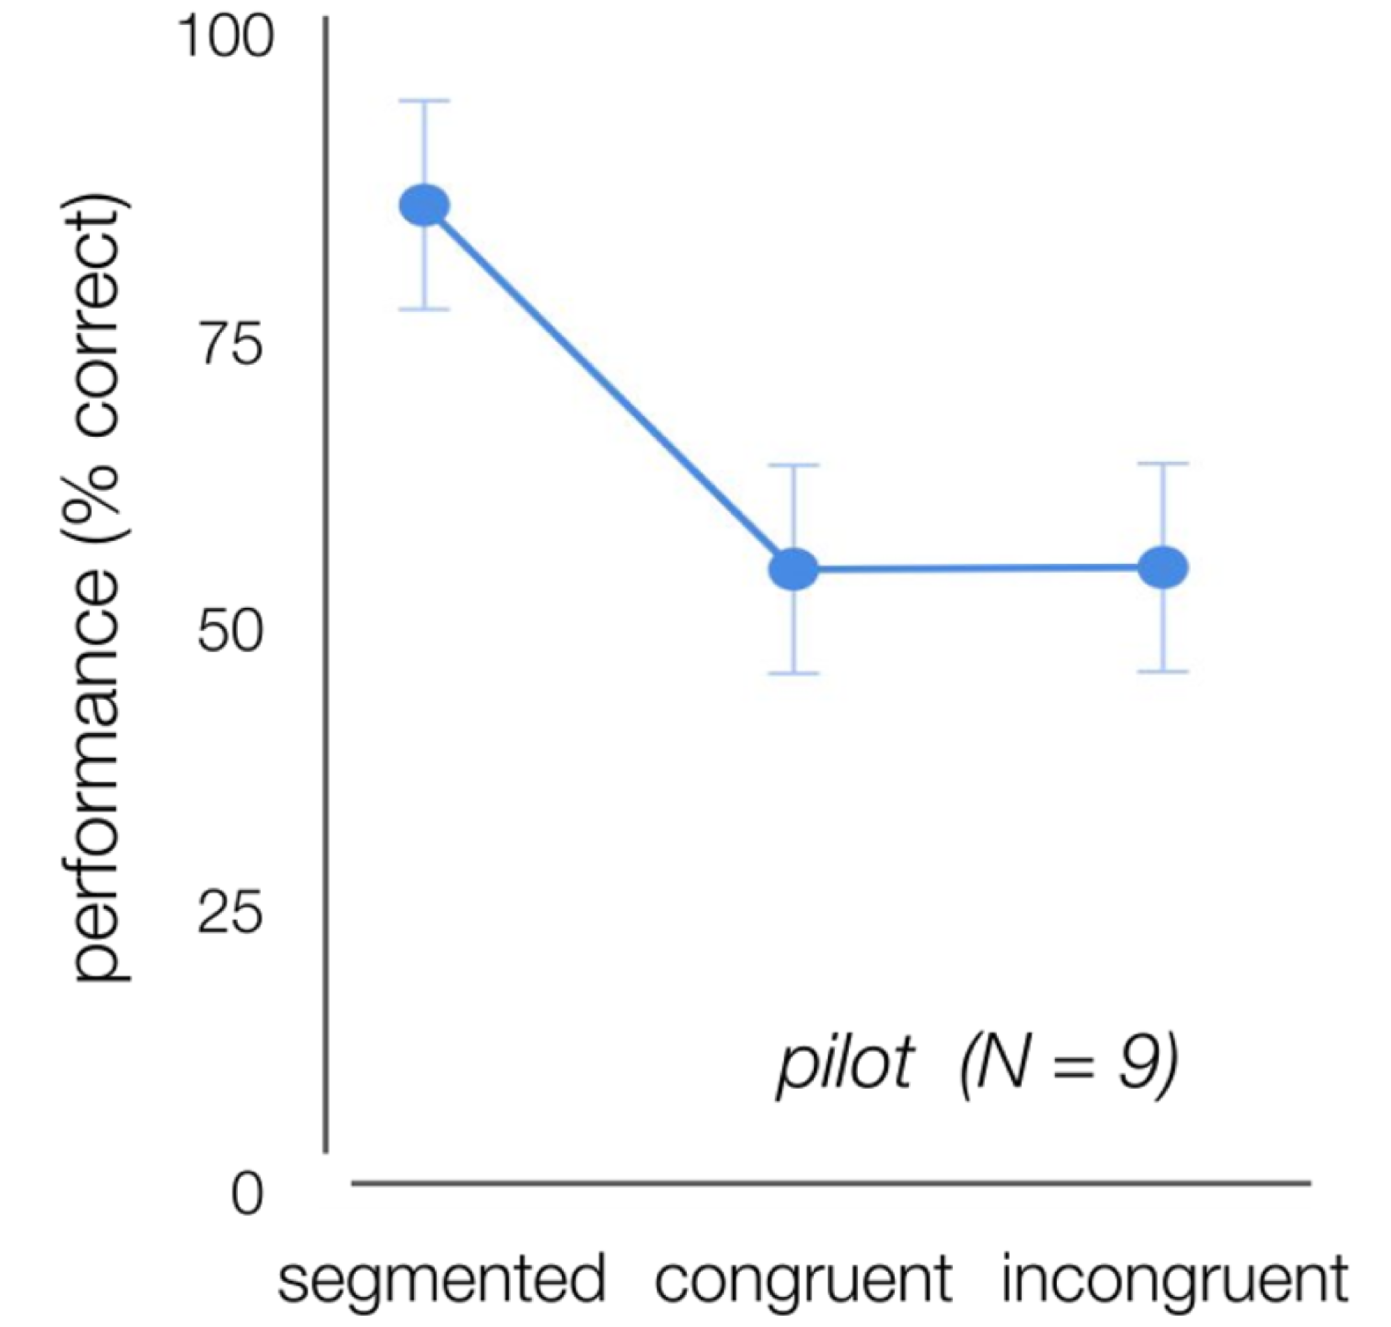 Human performance (% correct) on the object recognition task, using centered 3D-rendered objects on white, congruent or incongruent backgrounds. Performance was higher for the segmented condition, compared to congruent and incongruent.